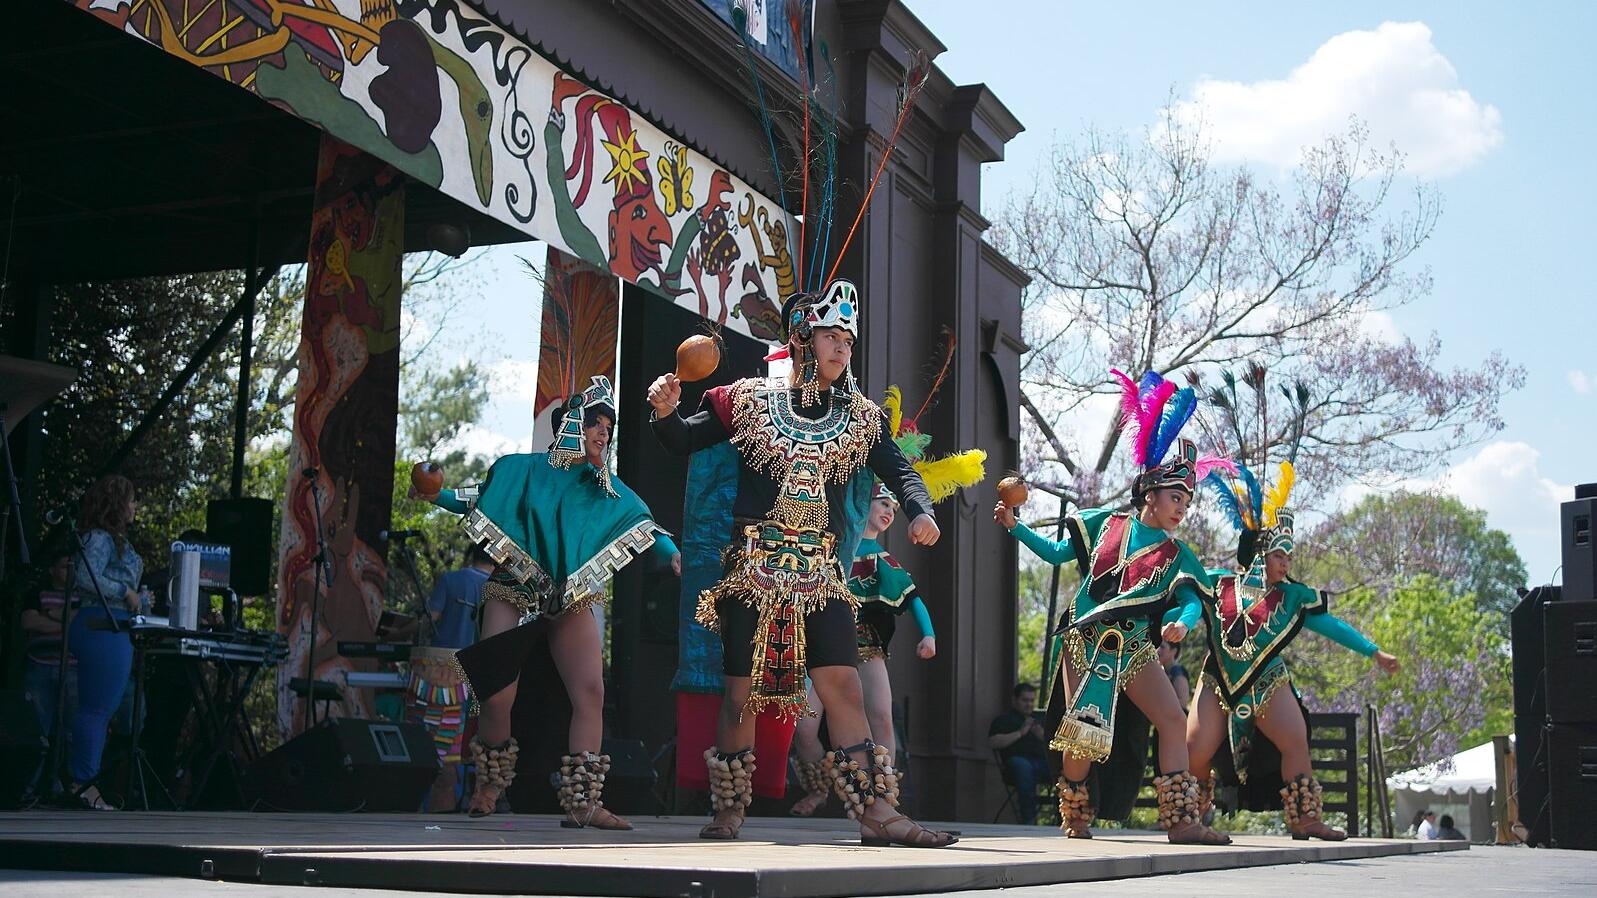 A photo of traditional Aztec dancing at a Cinco de Mayo celebration. Credit: S Pakhrin